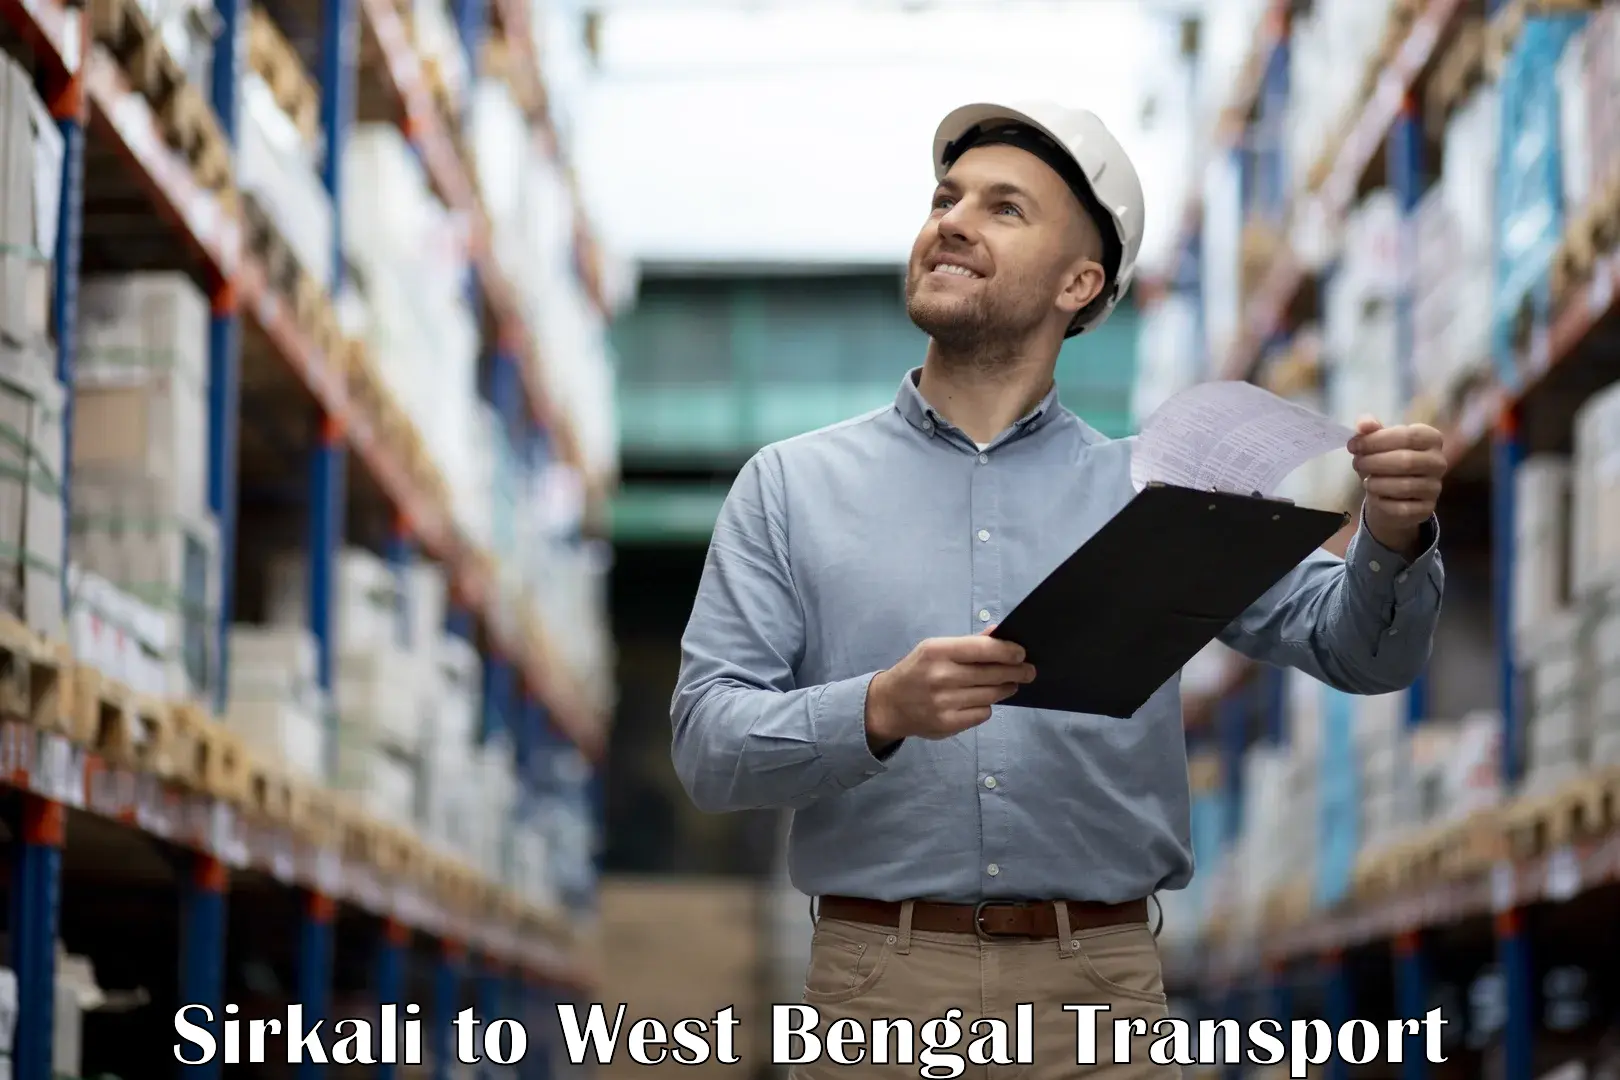 Container transport service Sirkali to West Bengal